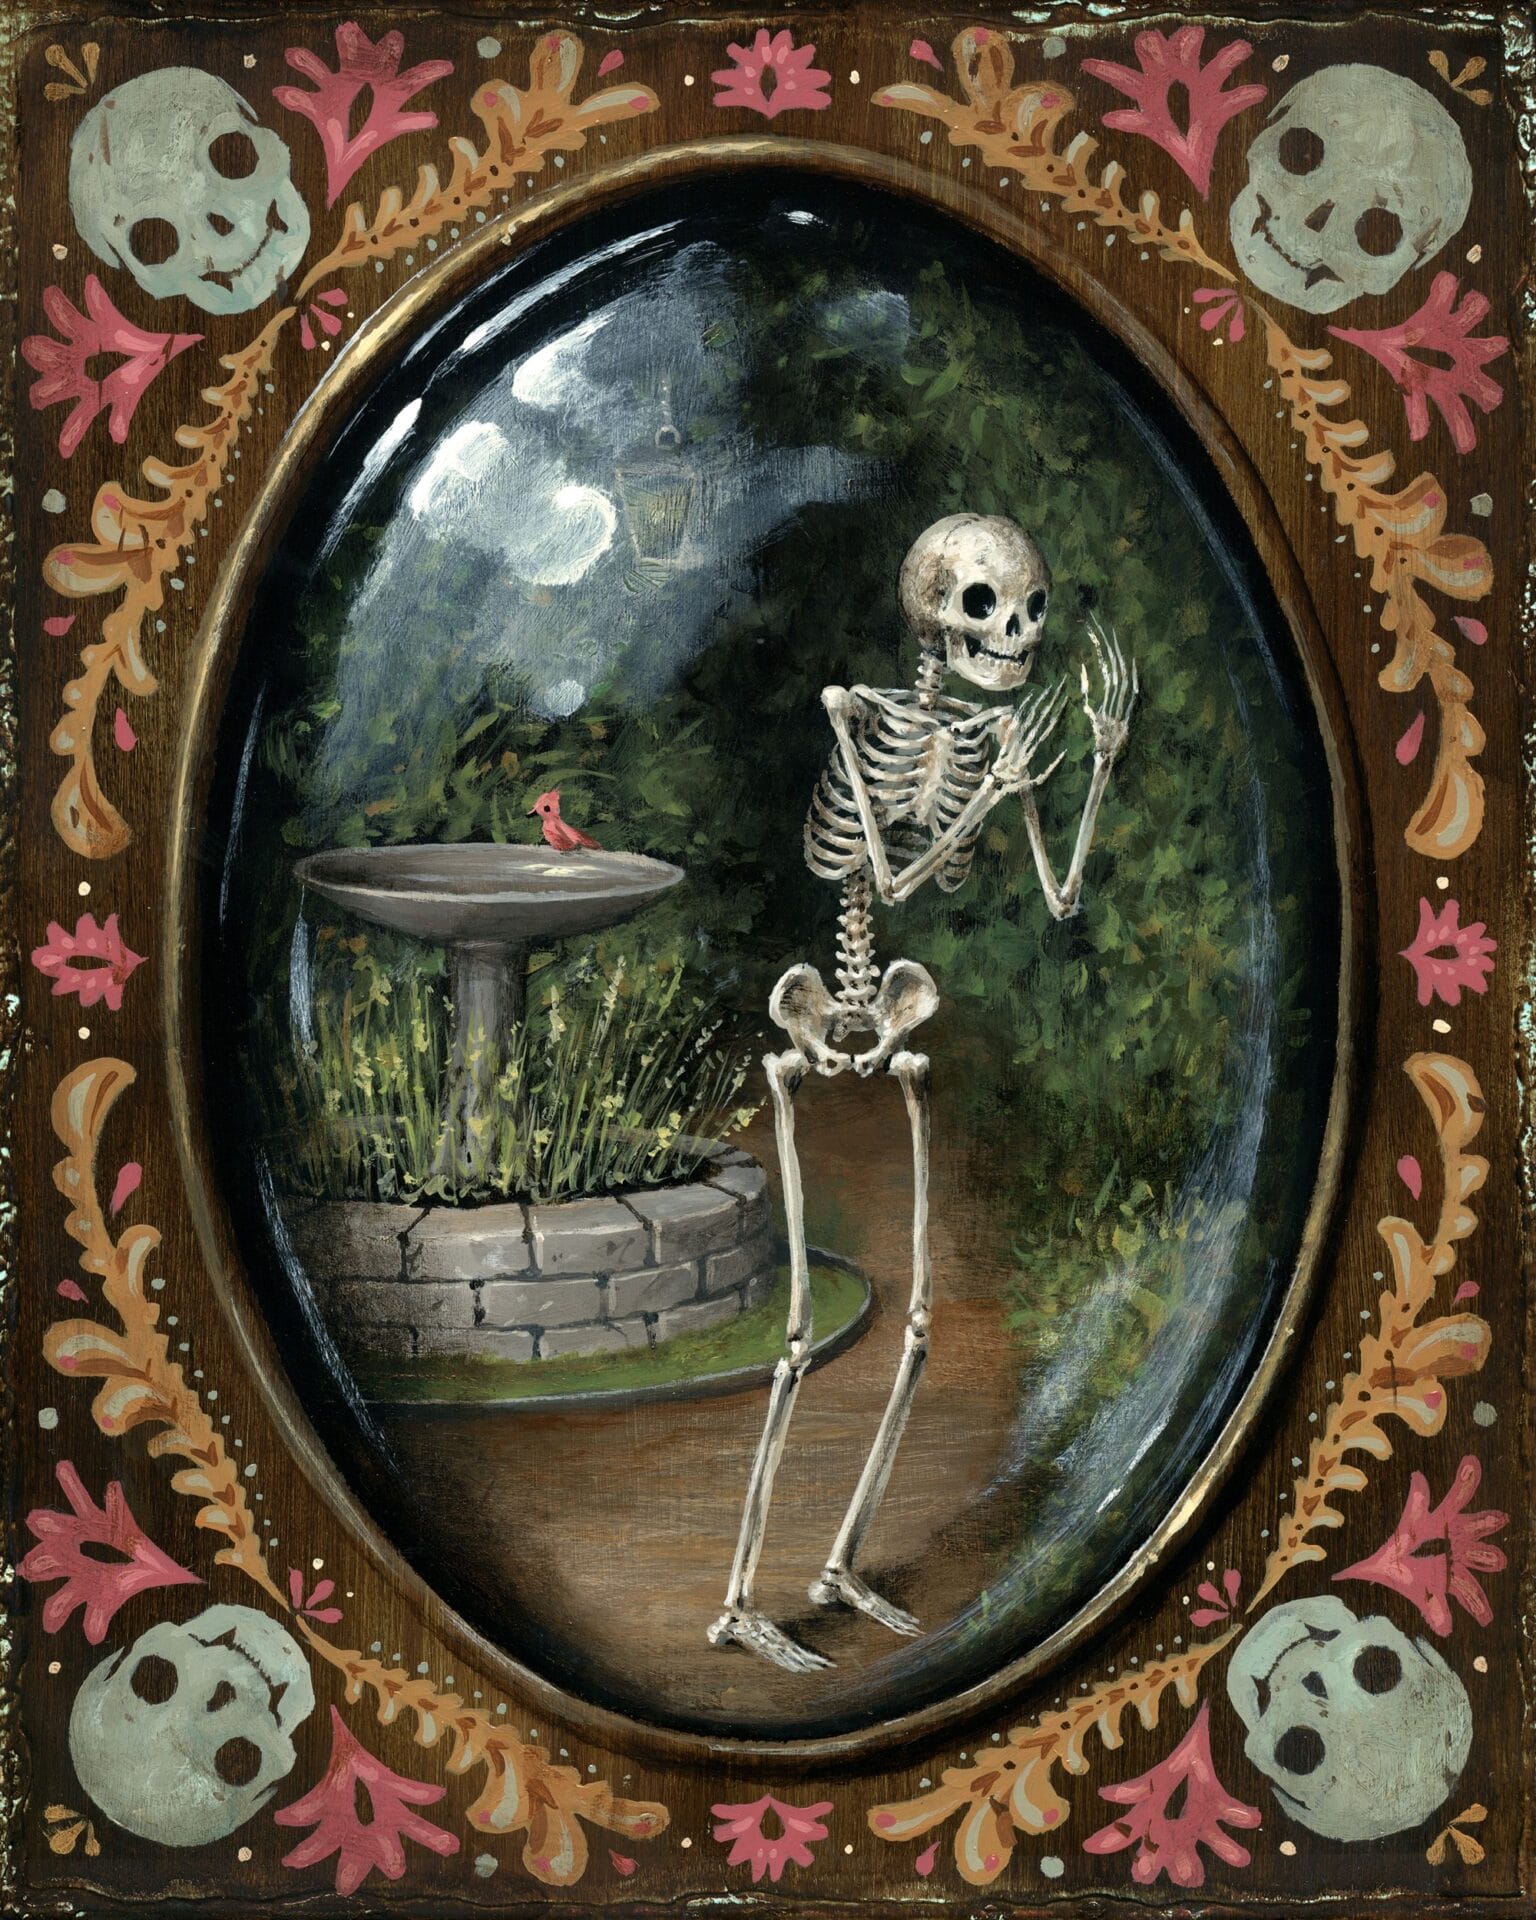 a skeleton is trapped in a garden that's in a frame. four gray skeletons are in the corner of the frame with orange and pink motifs surrounding